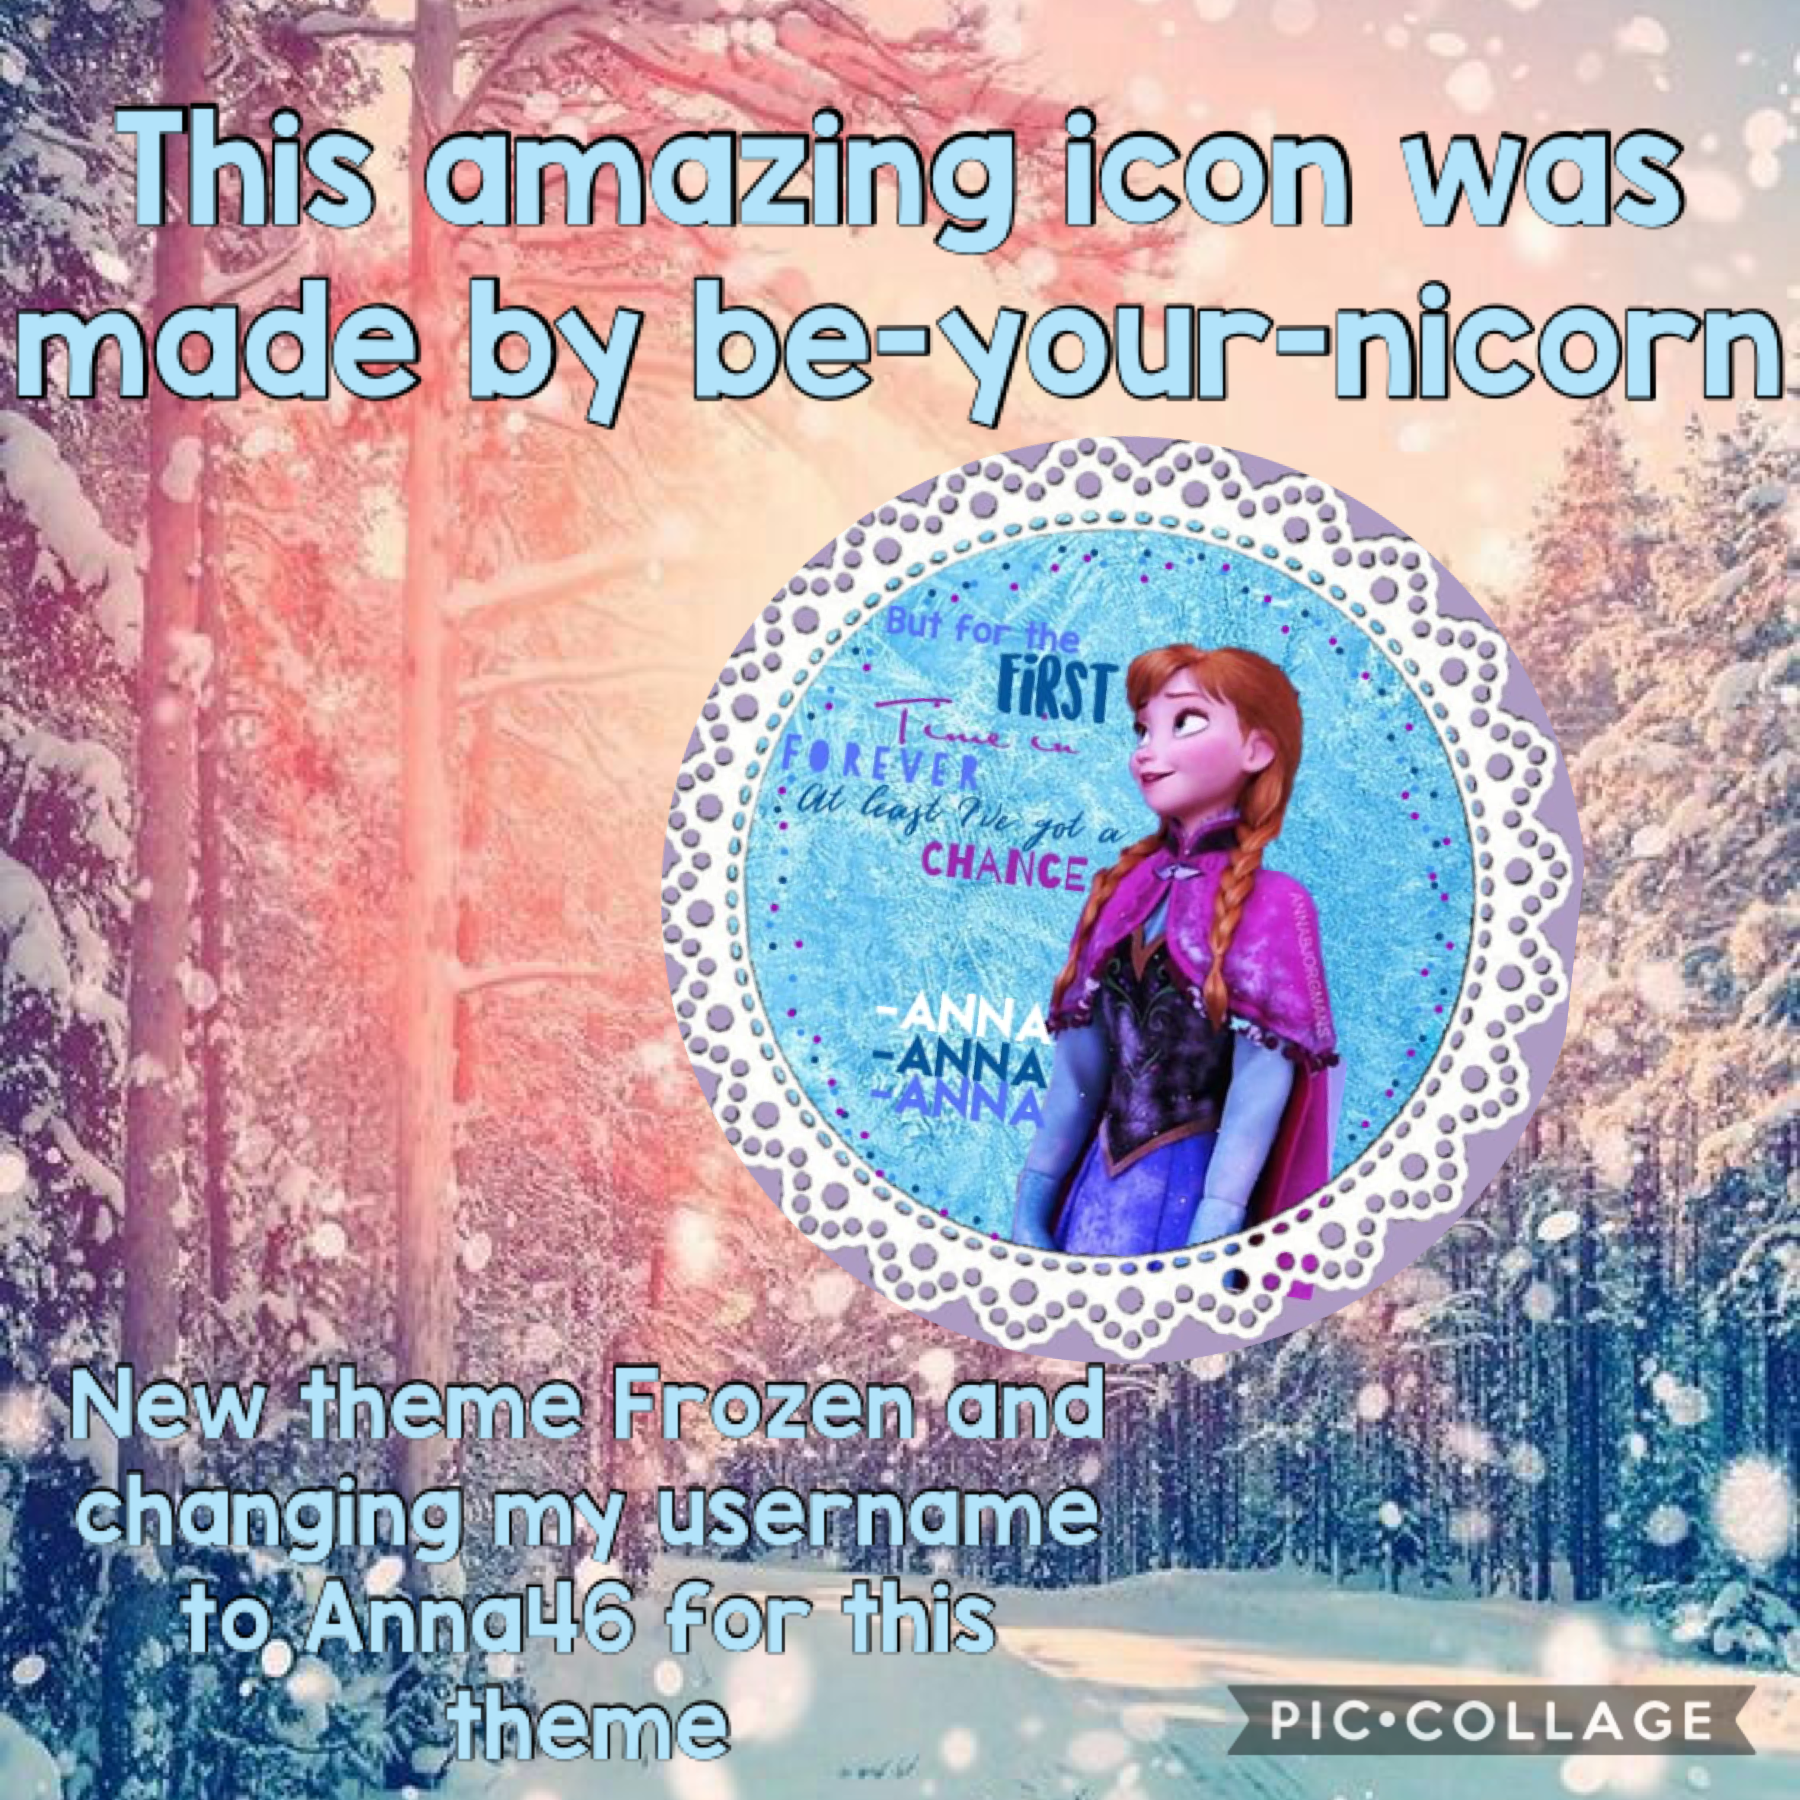 This amazing icon was made by Be-your-nicorn and theme frozen and changing my username to Anna46 